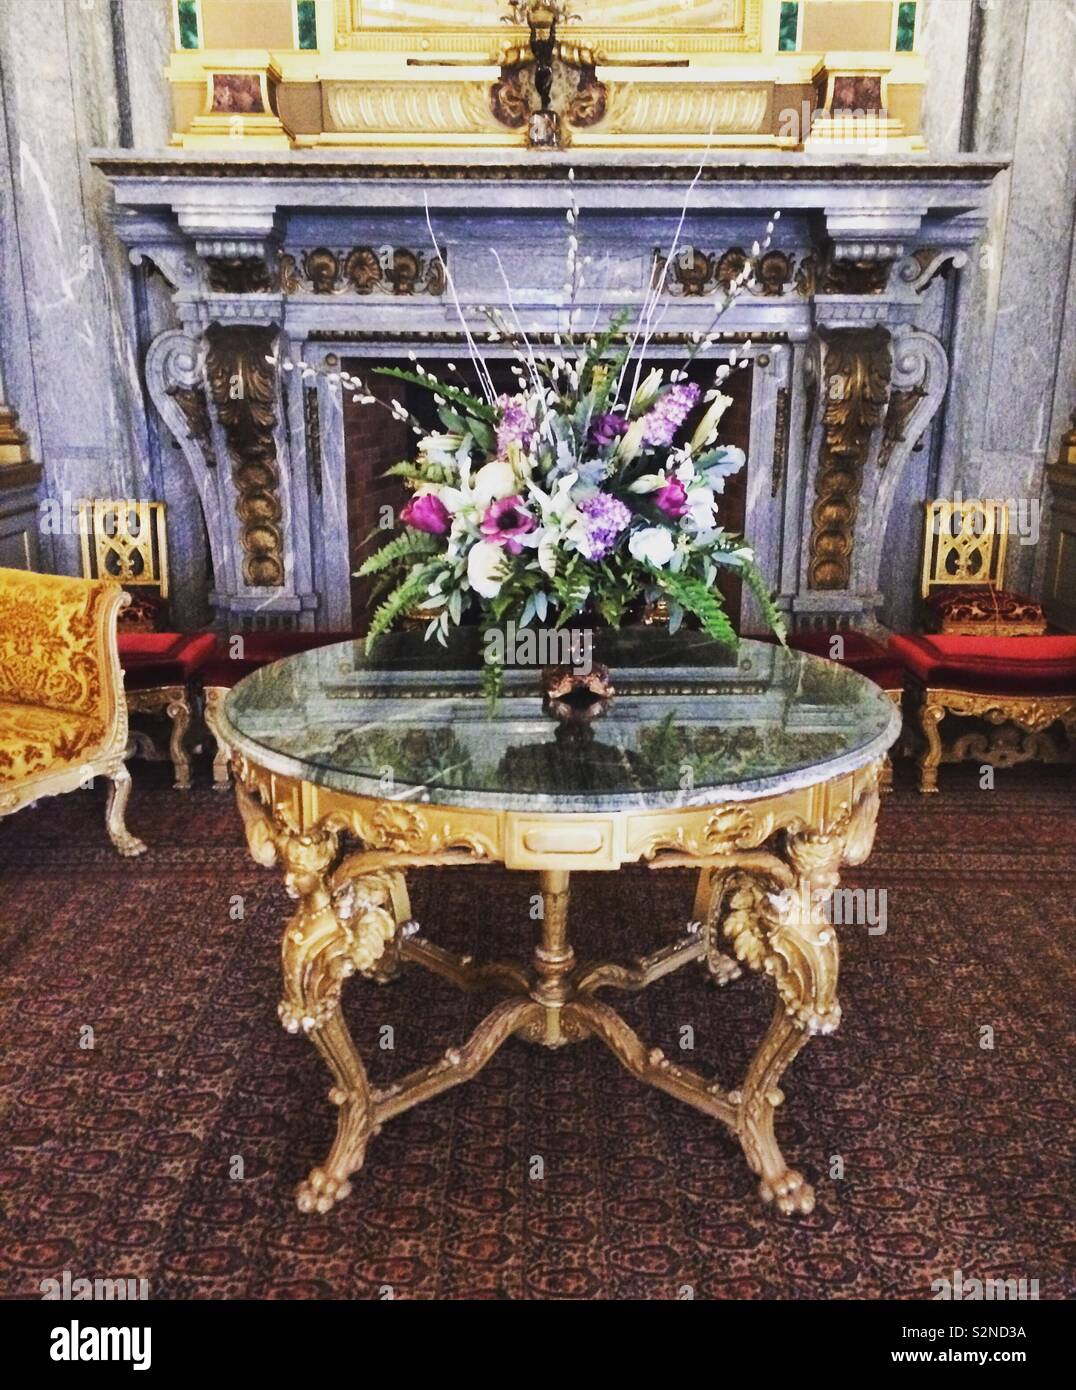 Flowers On A Table Inside The Breakers Mansion Newport